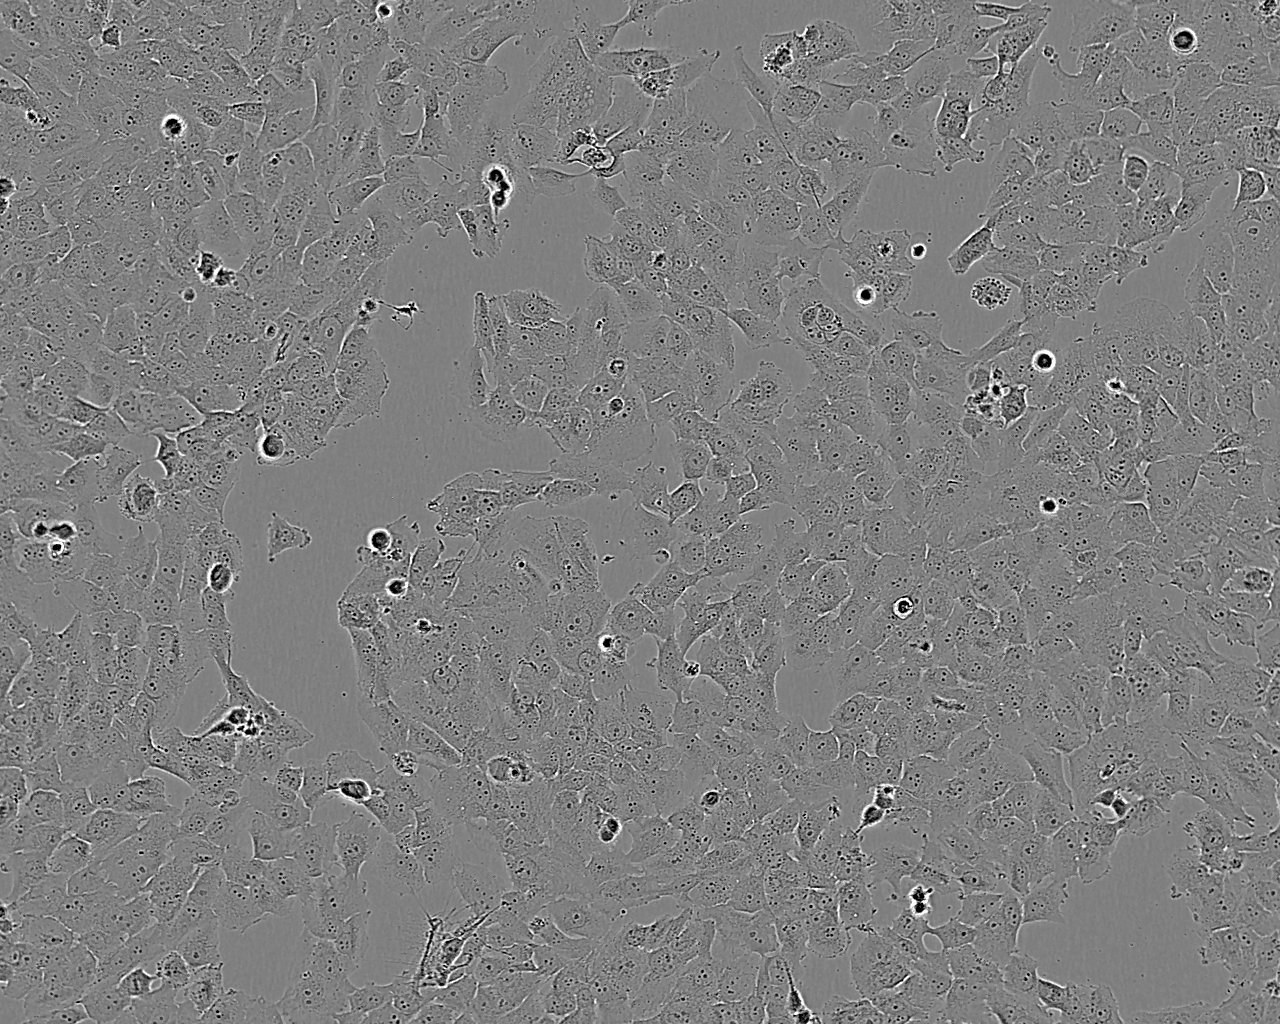 SW403 epithelioid cells人结肠腺癌细胞系,SW403 epithelioid cells